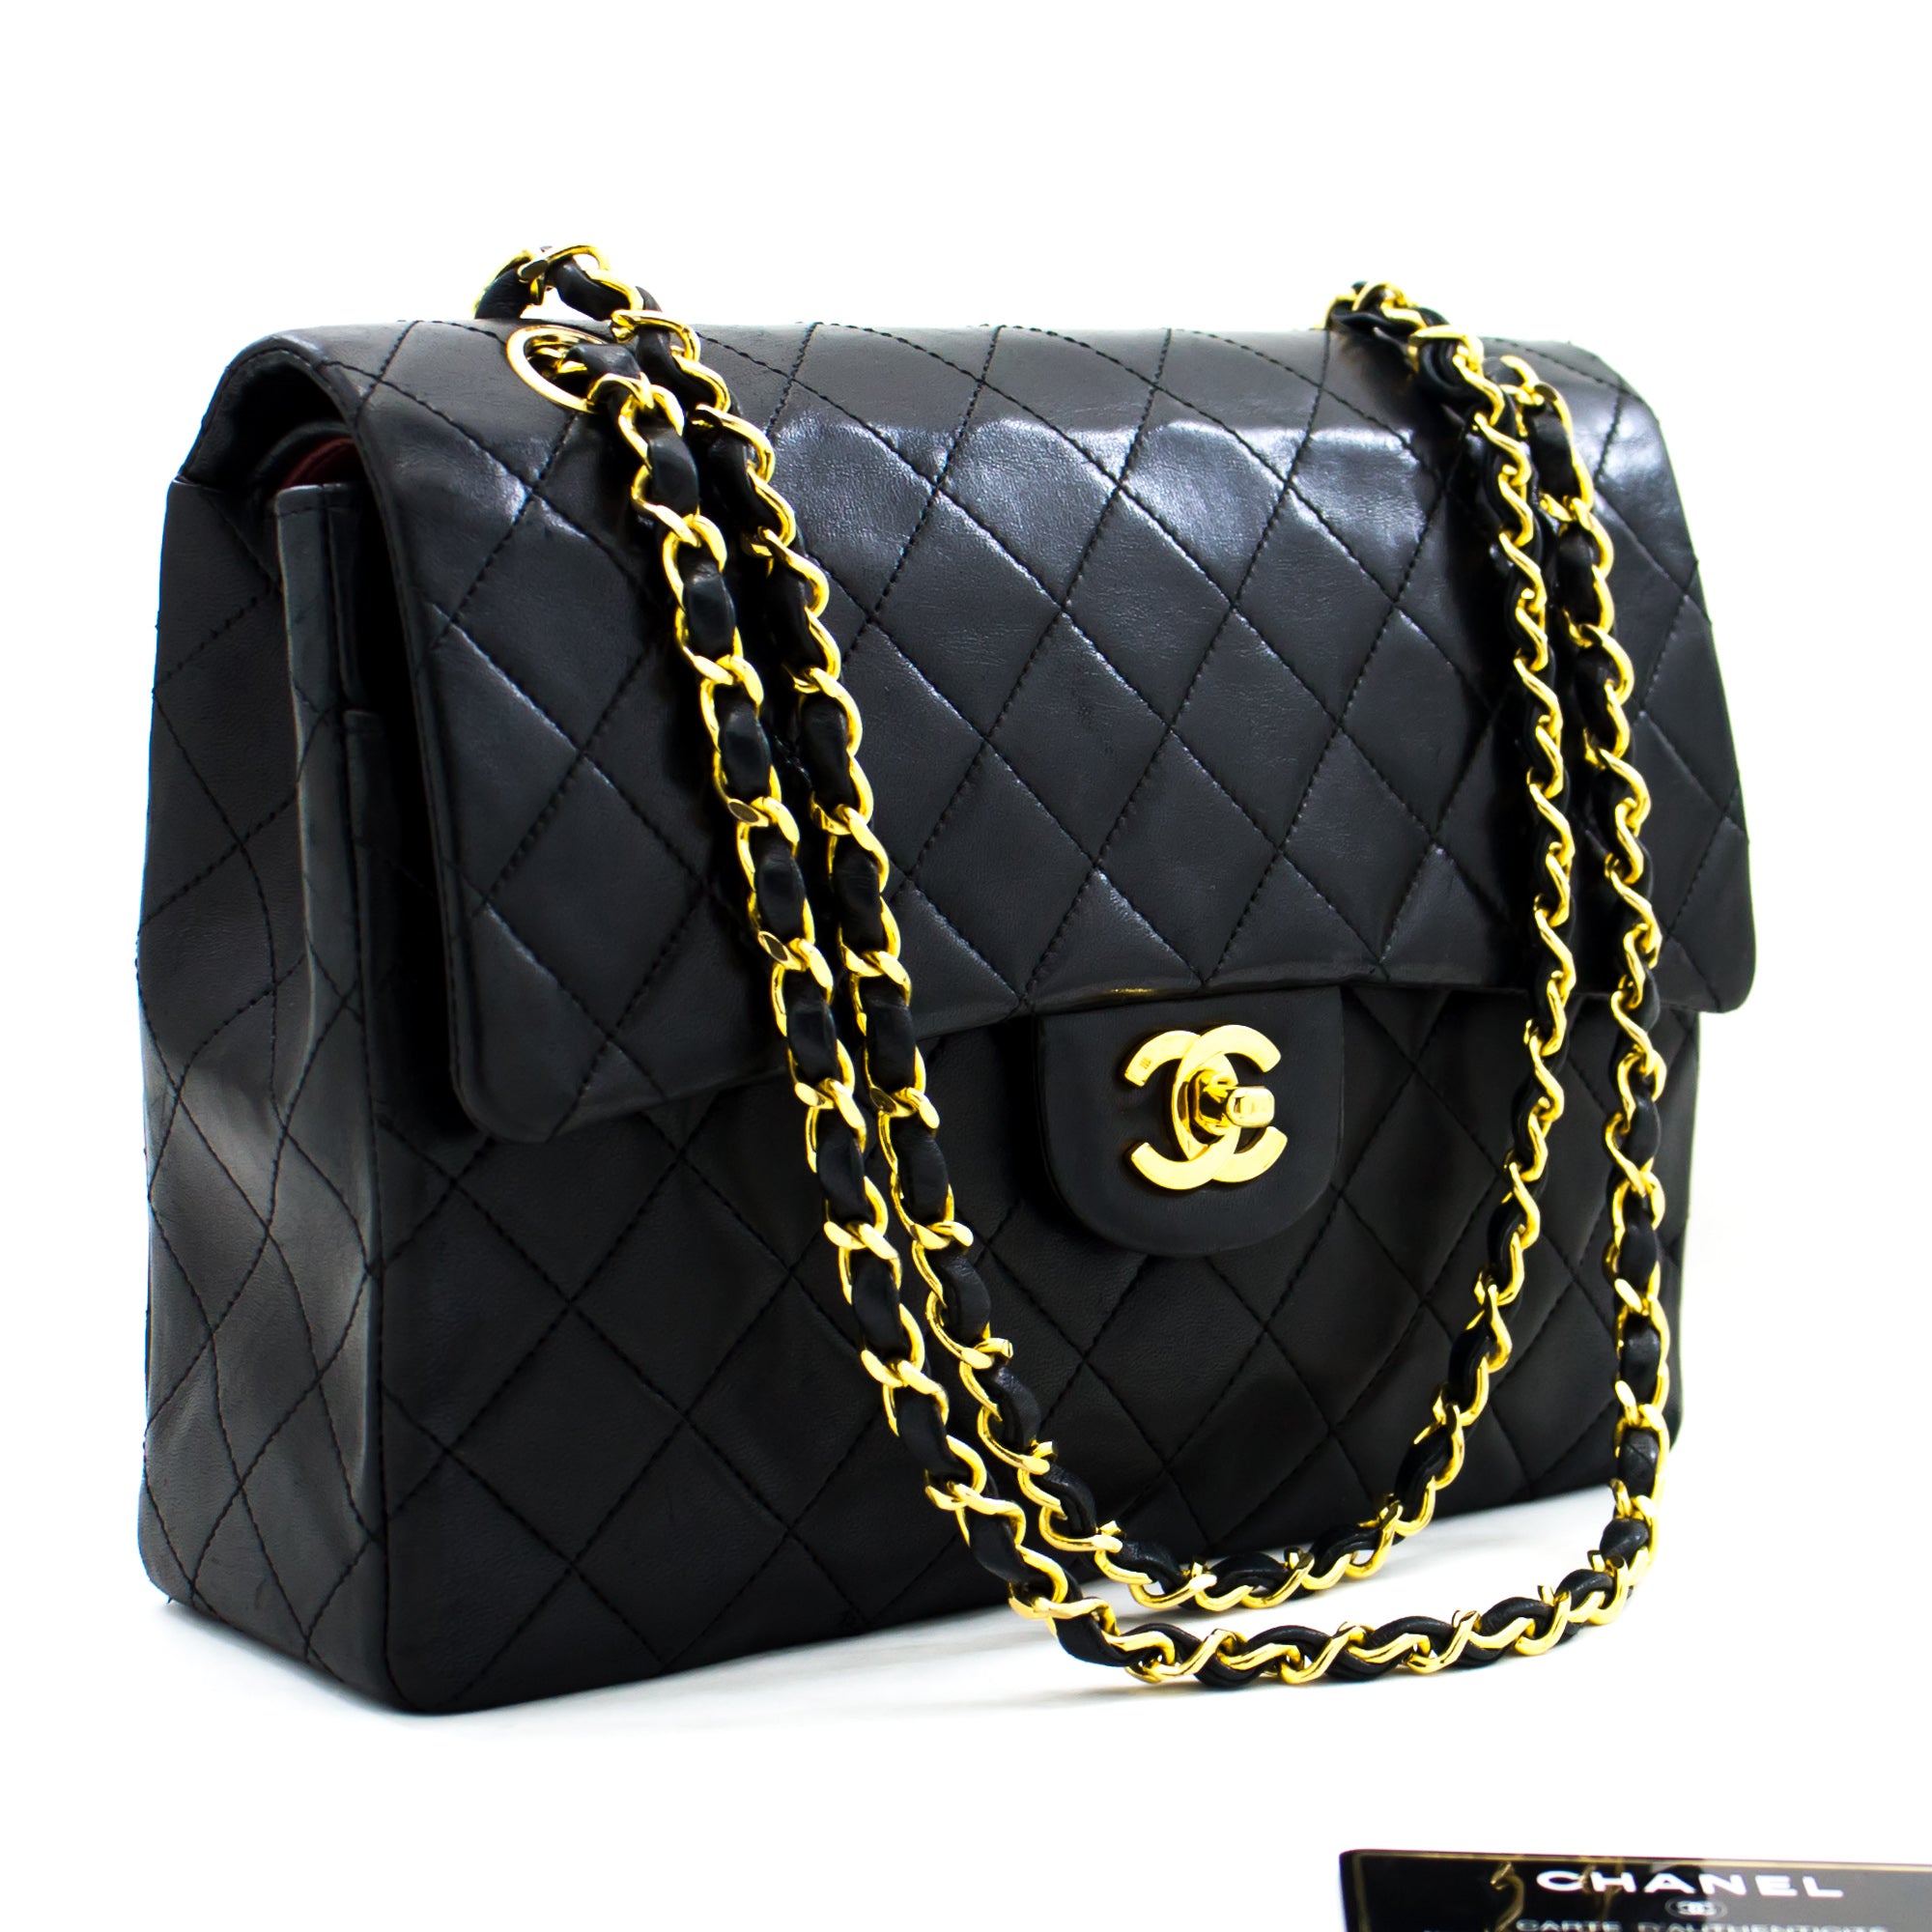 Chanel 33 Chanel 2.55 Double Flap Black Quilted Leather Shoulder Bag